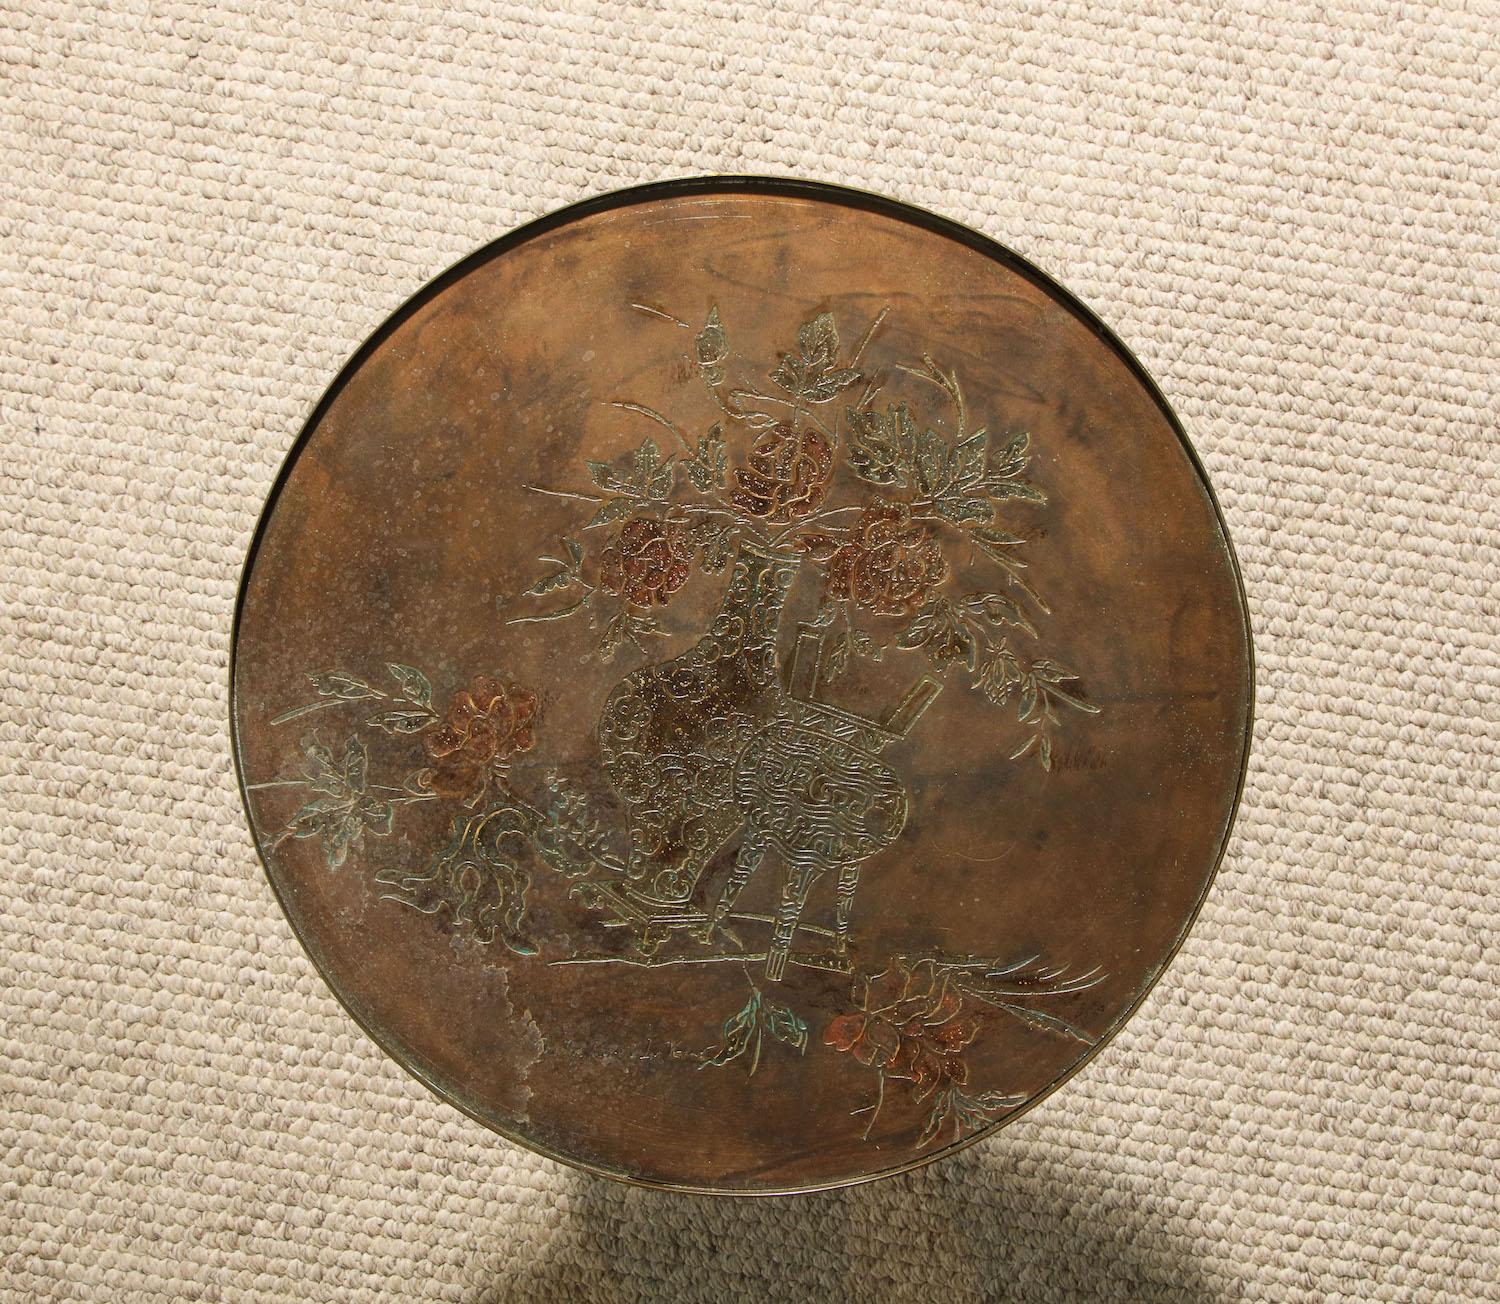 Shang Ti, circular side table by Philip and Kelvin LaVerne. Bronze table with 3 legs and multiple supports. Top has etched design in pewter with enameled color additions. Etched signature to top surface. Original condition, recently cleaned.